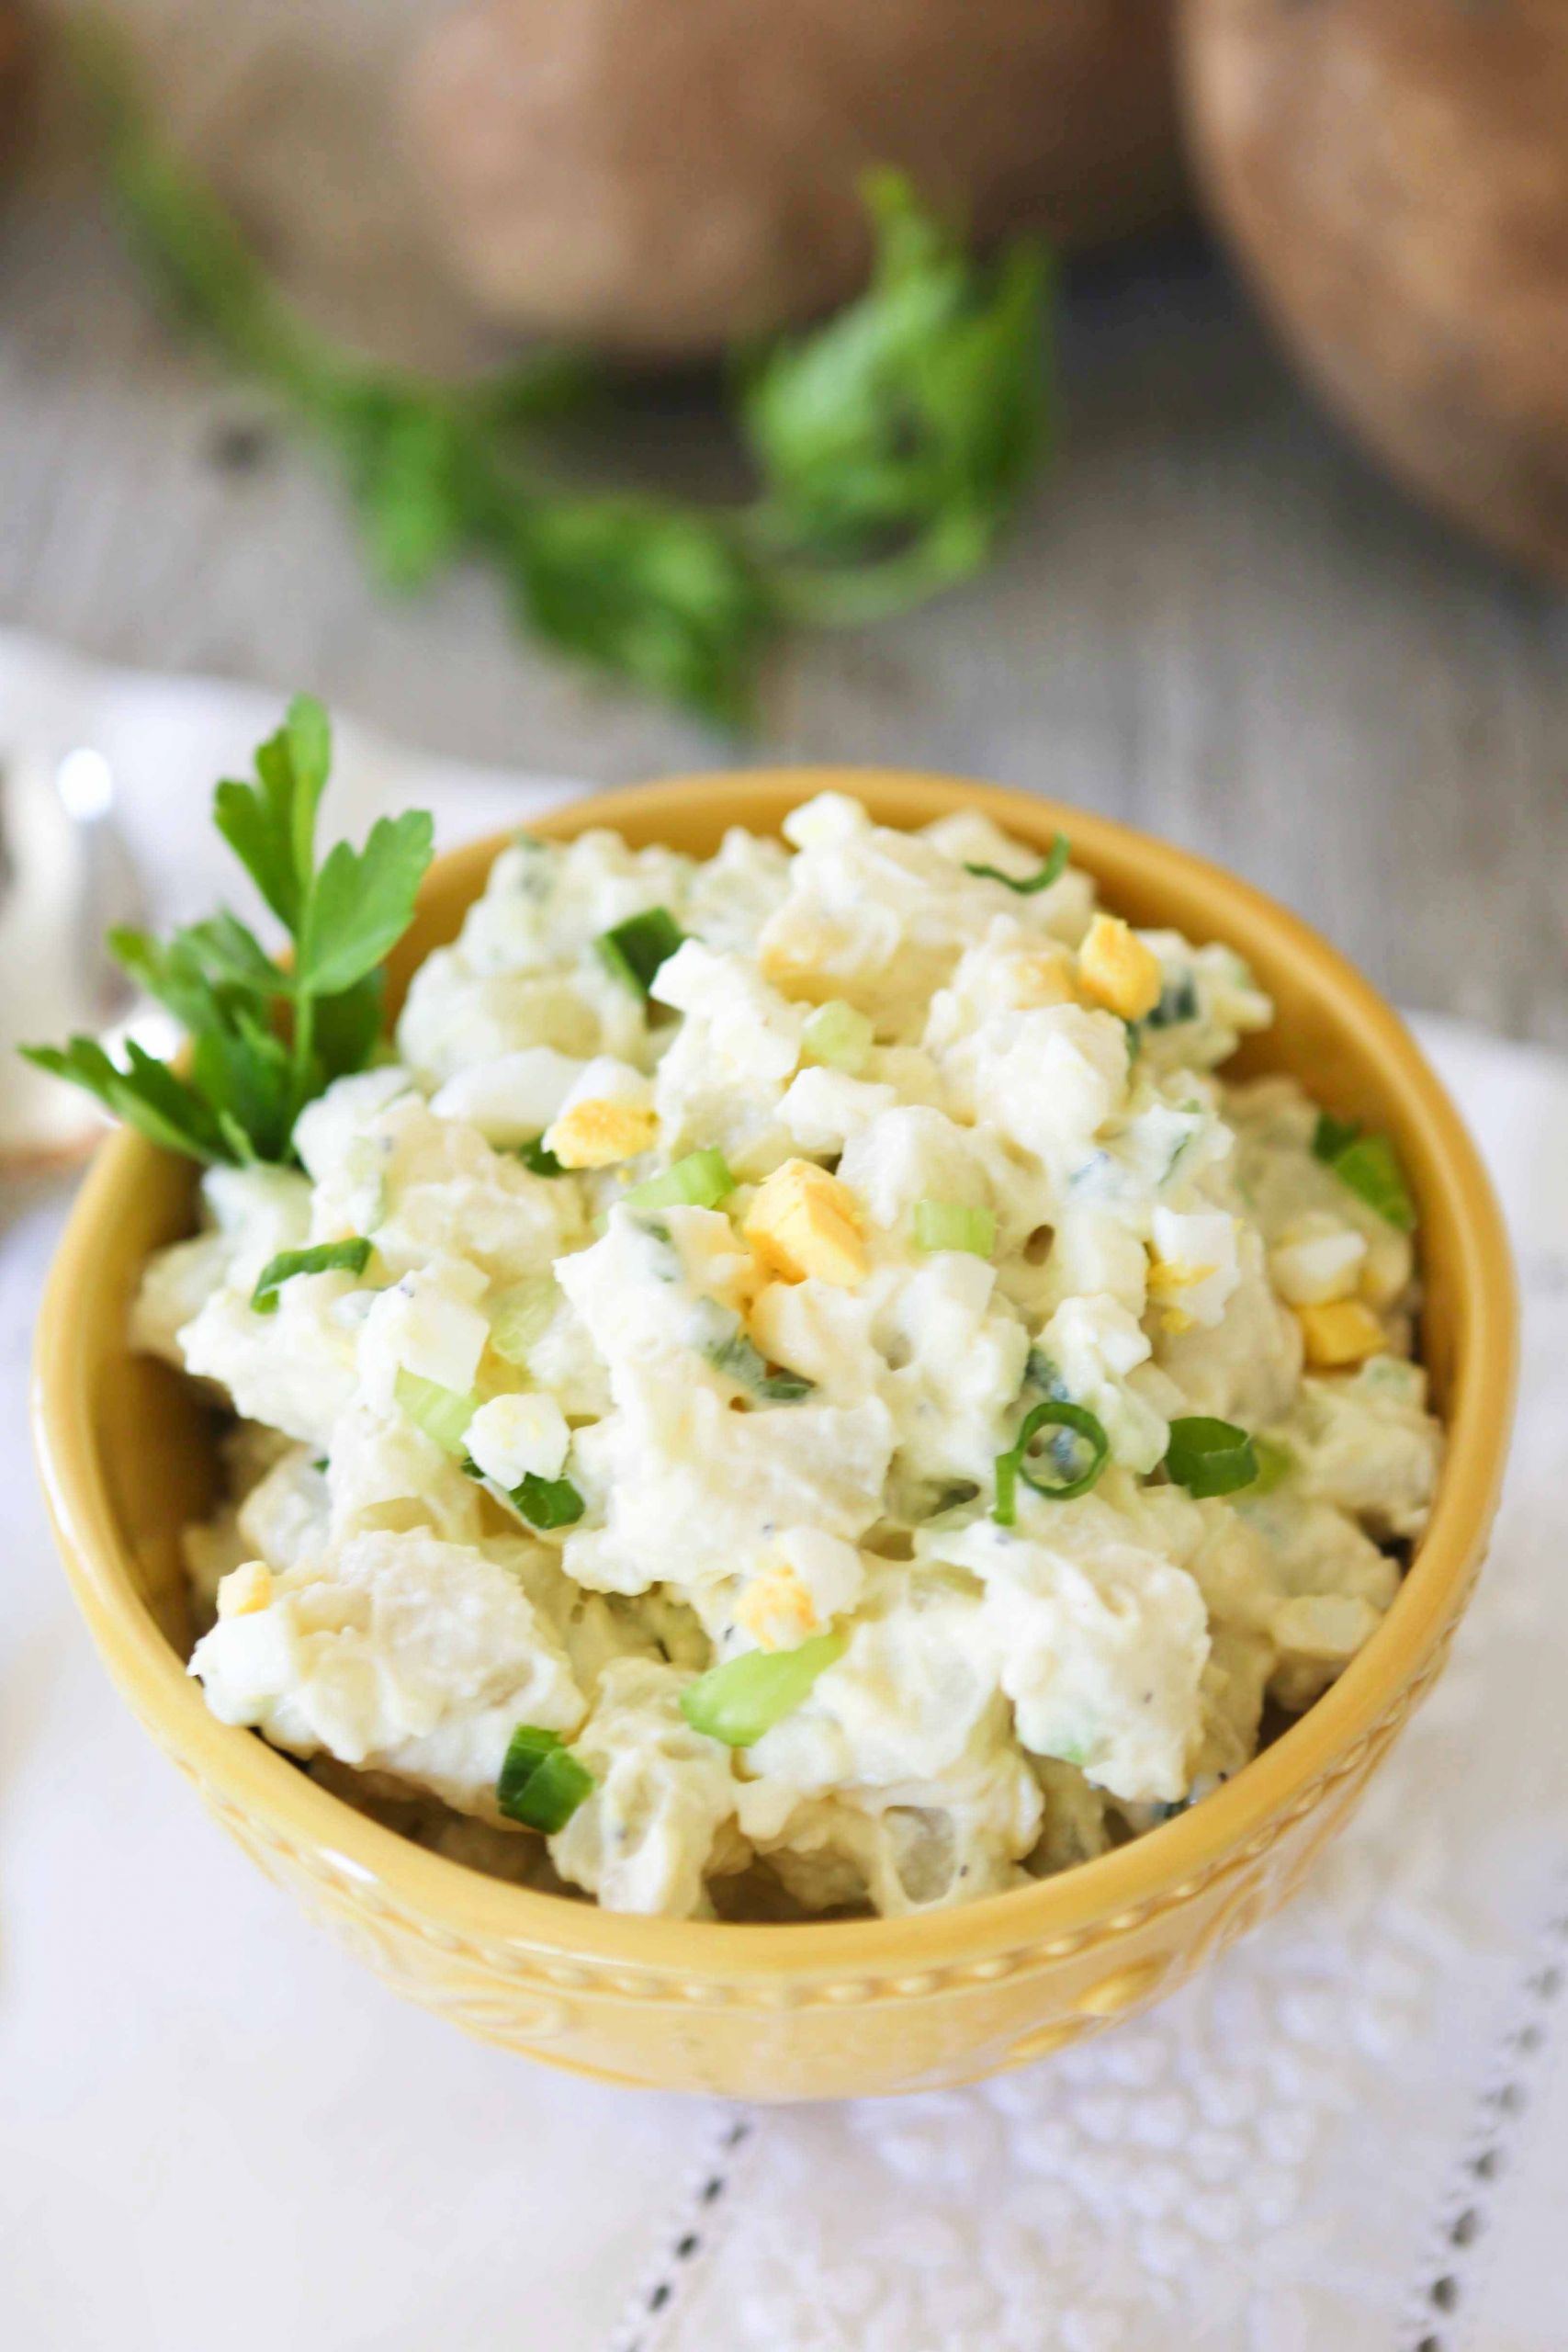 Best White Potato Salad Compilation – Easy Recipes To Make at Home